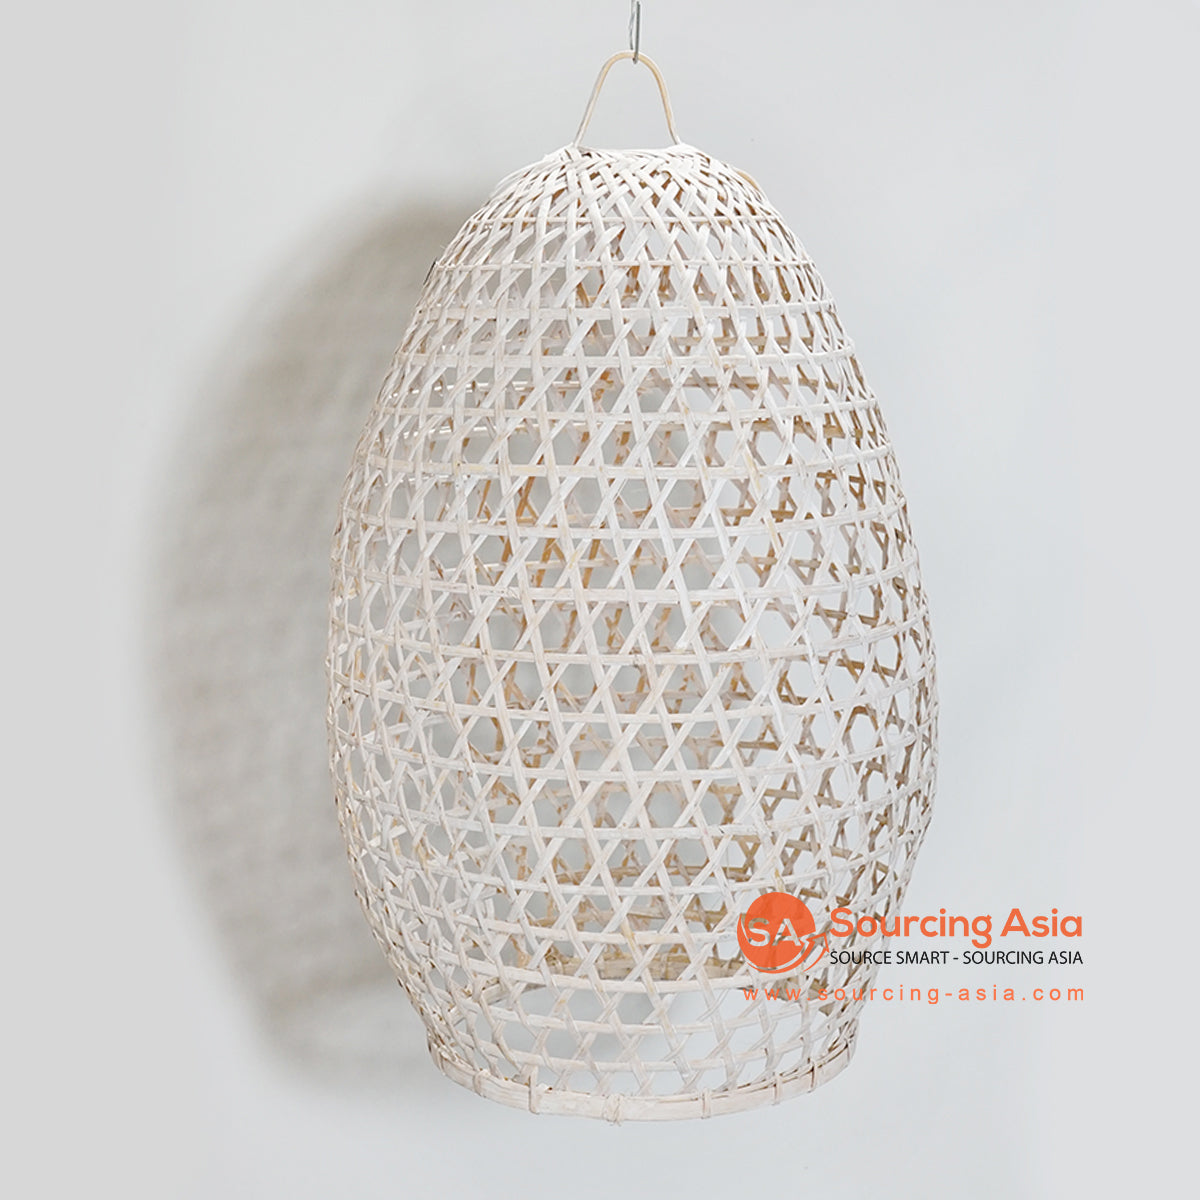 HBSC226 WHITE BAMBOO WOOD CHICKEN CAGE PENDANT LAMP